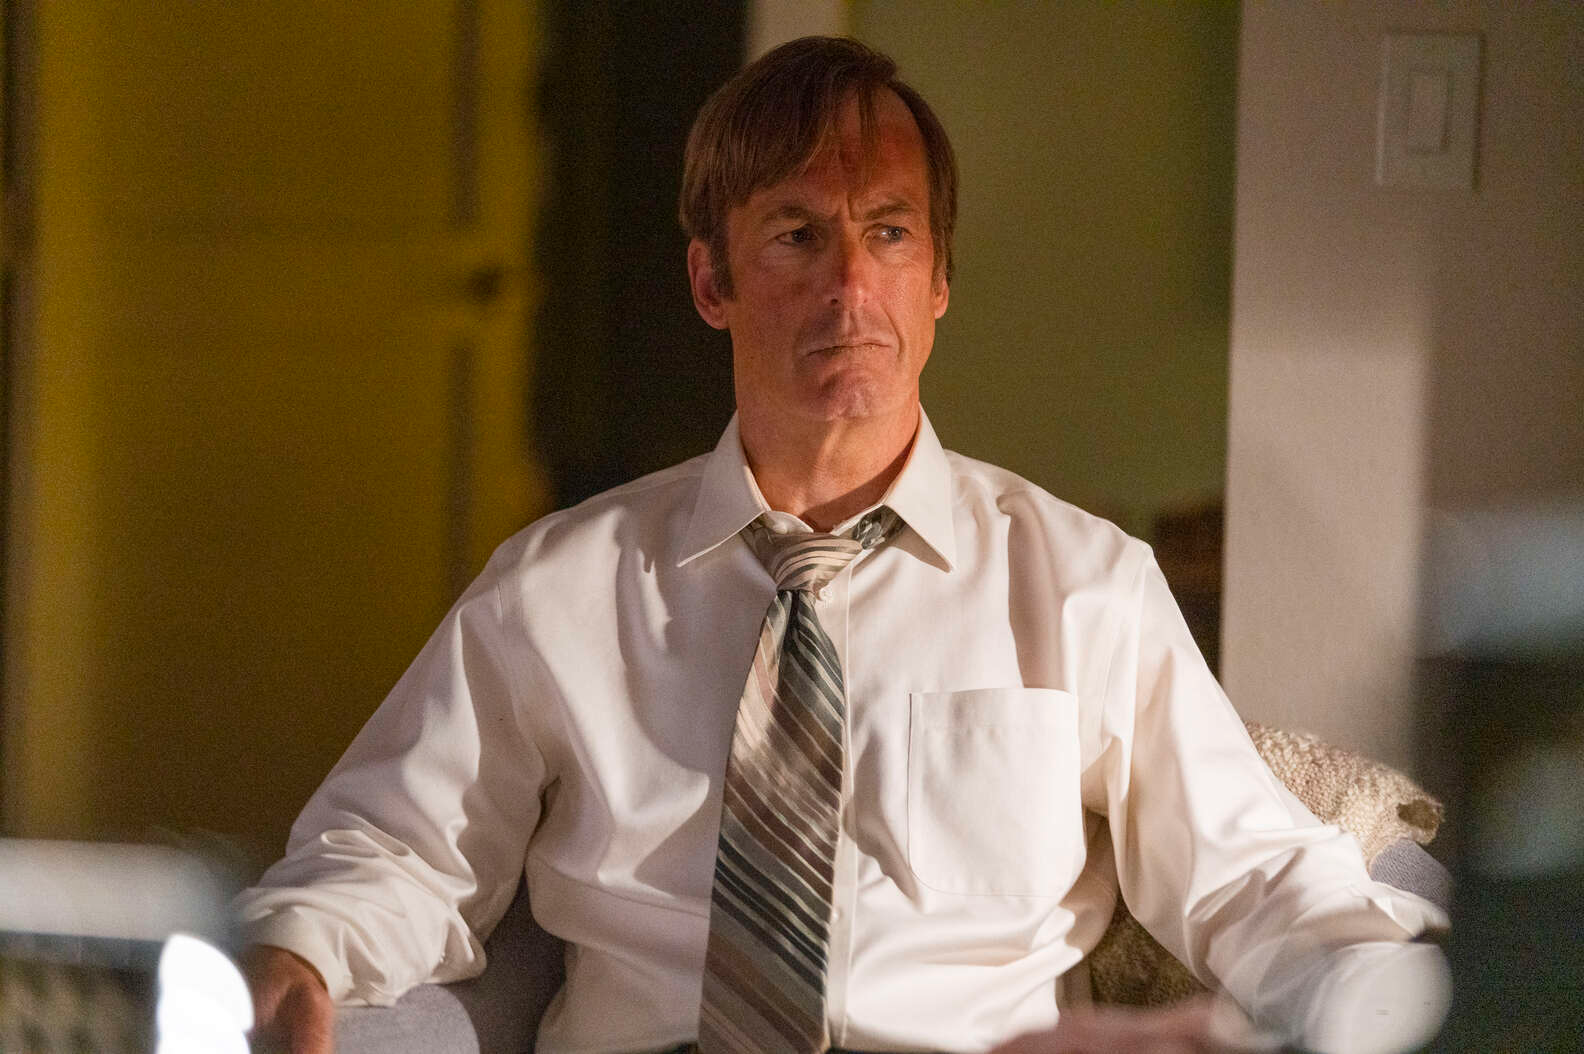 Better Call Saul season 6: Release Date, Cast, Trailer, Plot and More News